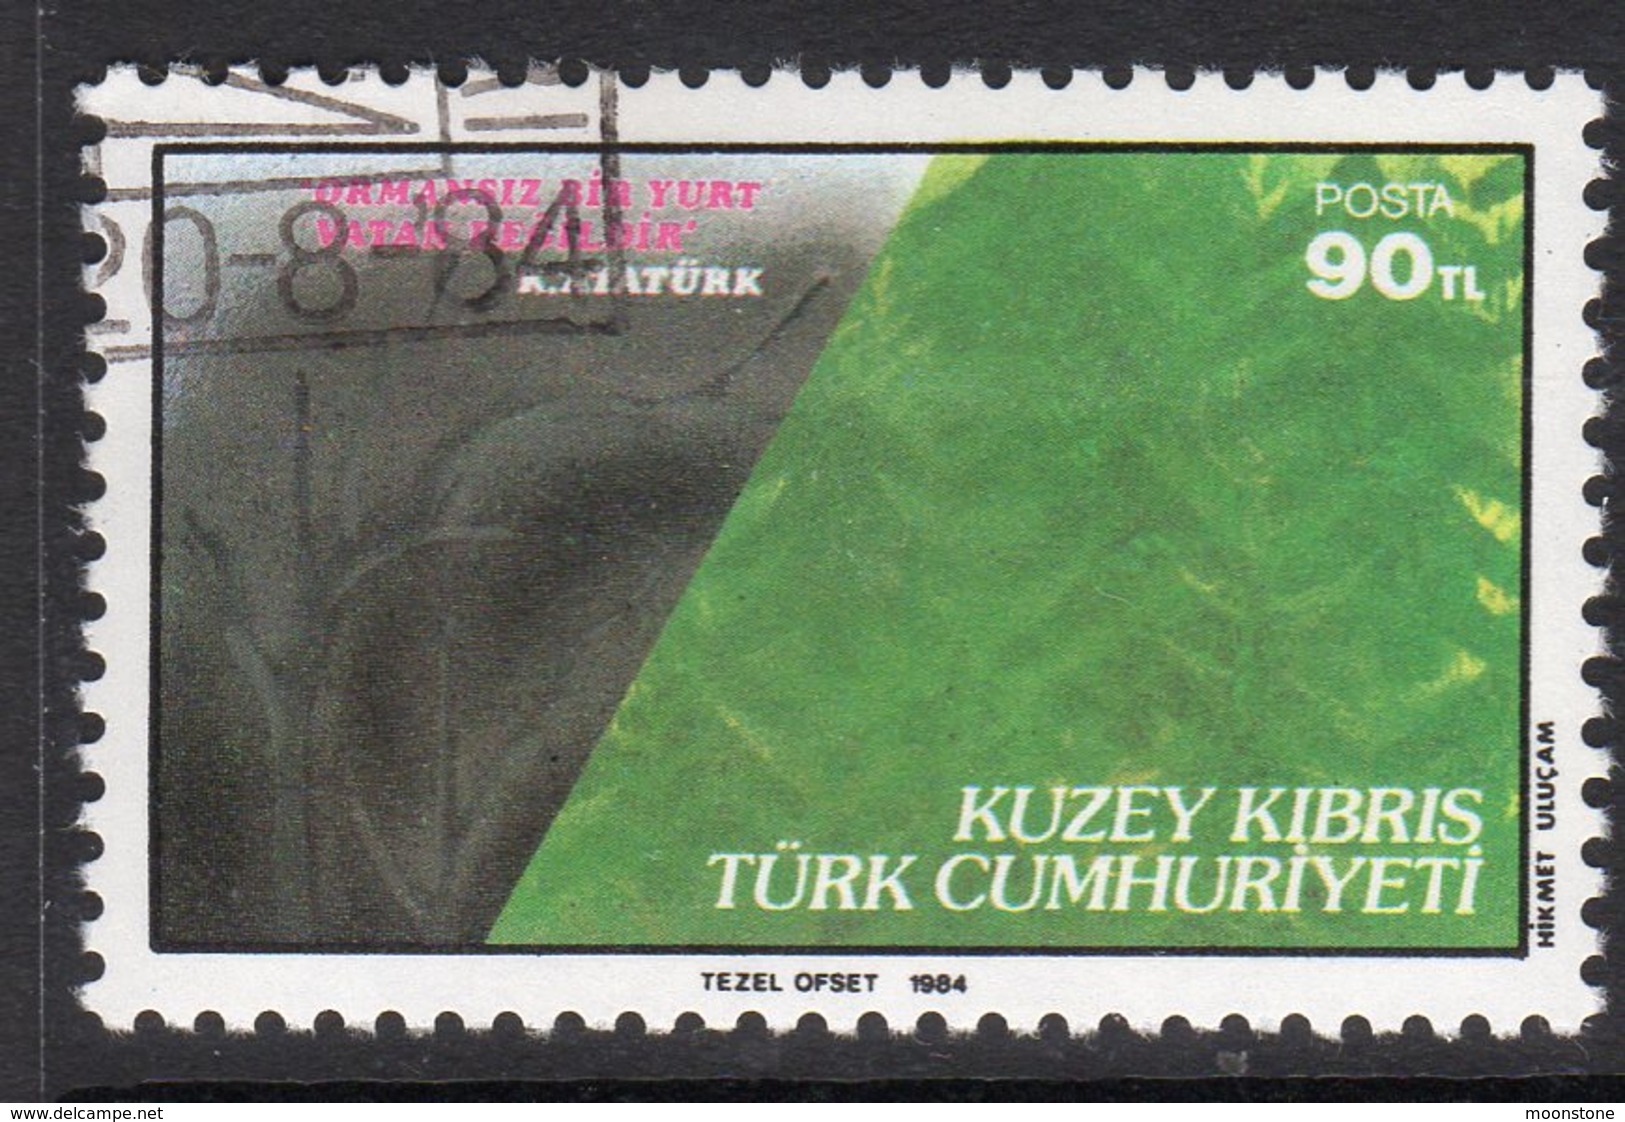 Cyprus Turkish 1984 World Forestry Resources, Used, SG 156 (A) - Usati